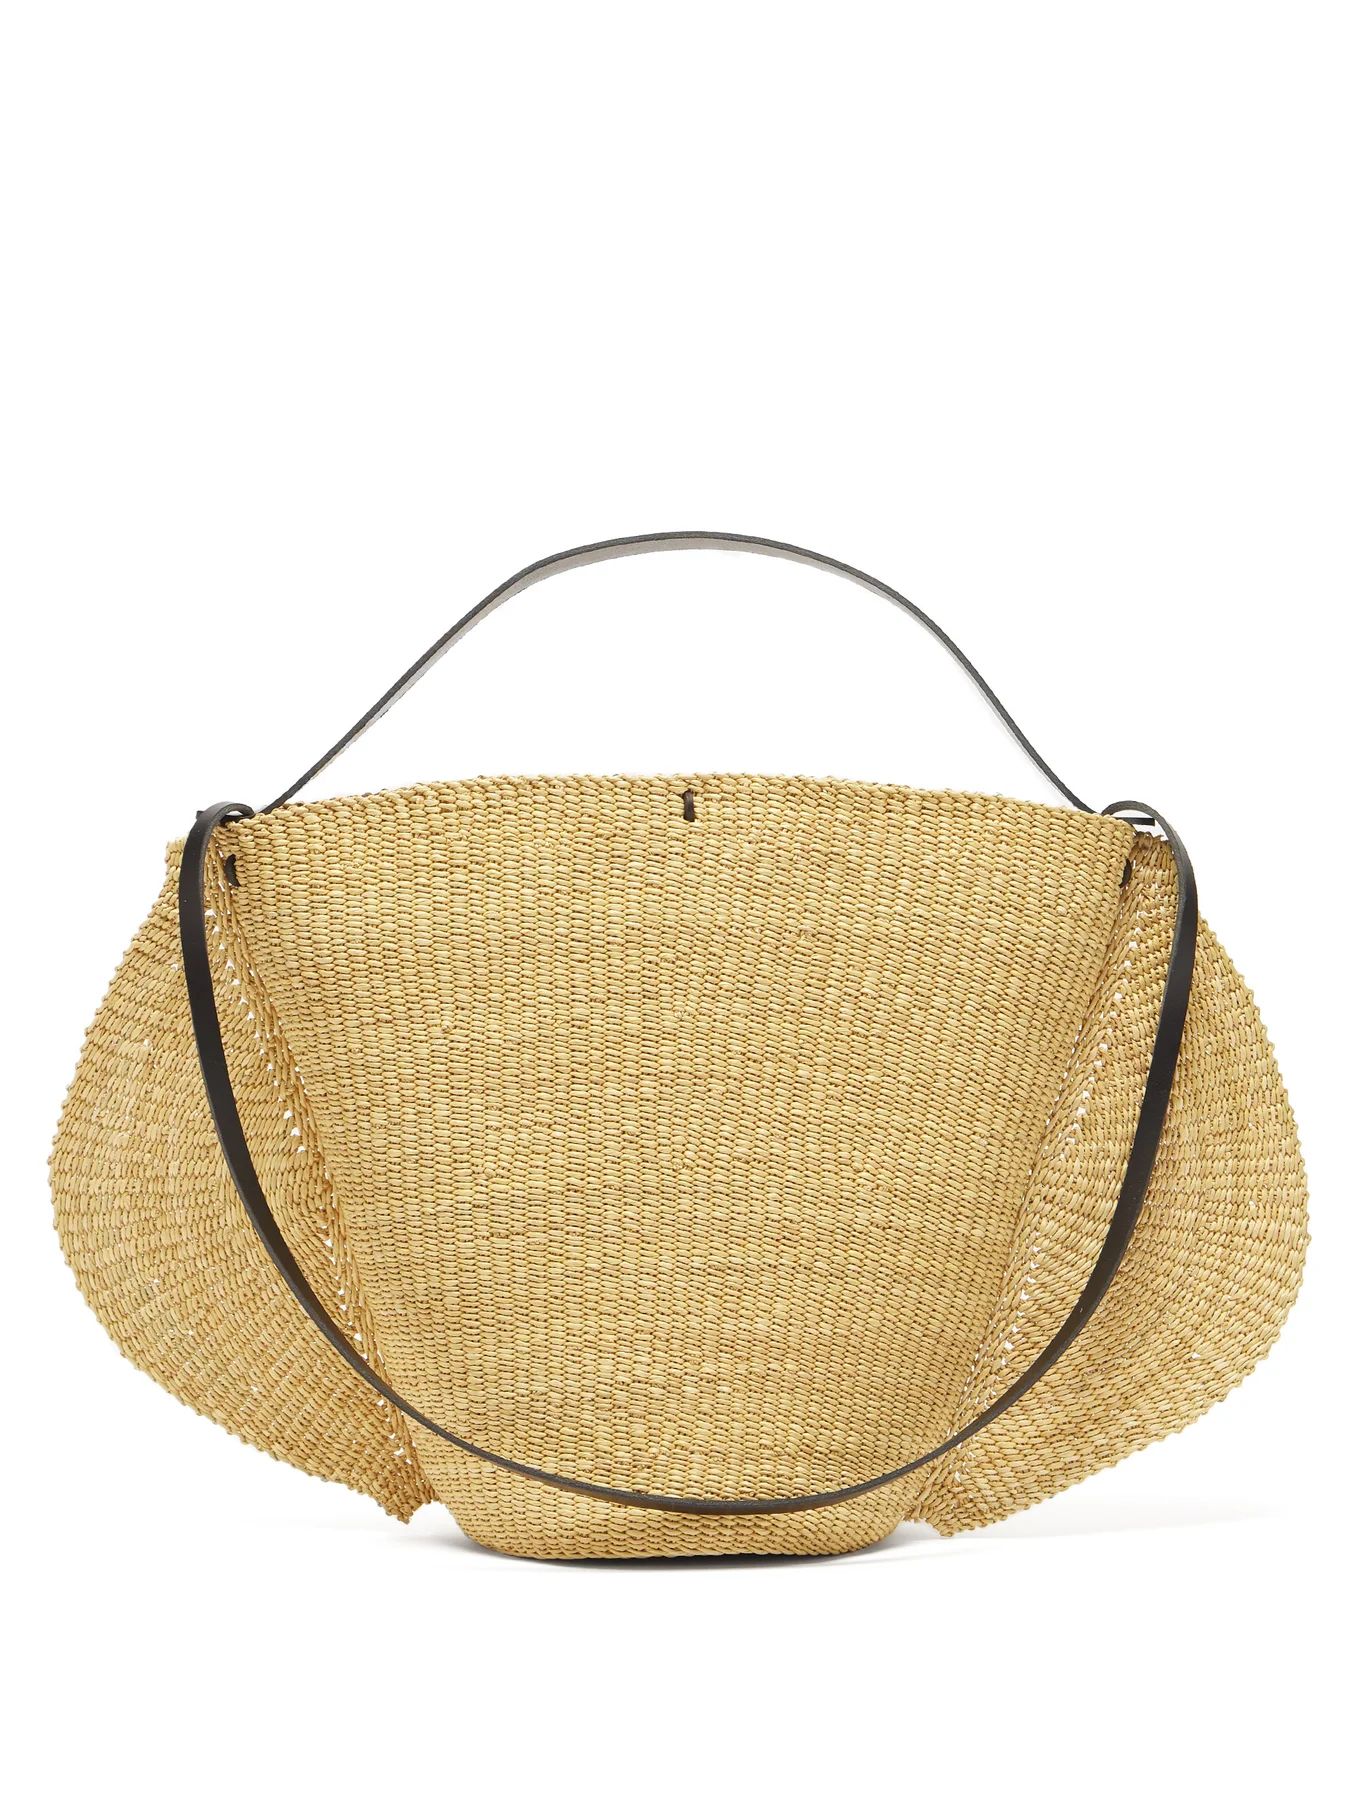 N.30 Akamae leather-trimmed straw bag | Inès Bressand | Matches (US)